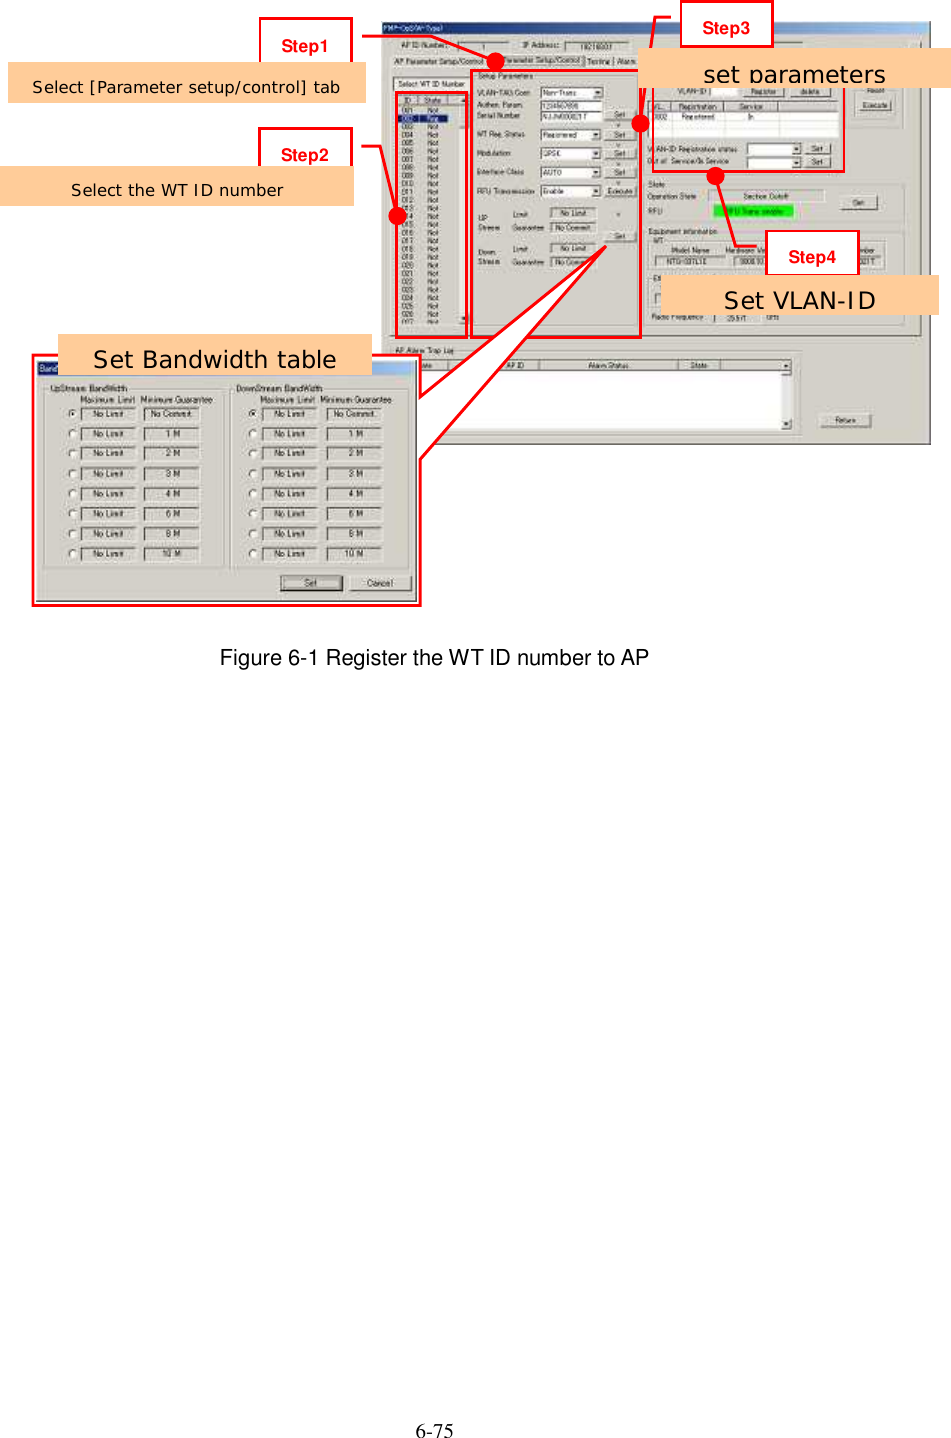   6-75     Figure 6-1 Register the WT ID number to AP    Step1 Step2 Step3 Step4  Set Bandwidth table Select [Parameter setup/control] tab Select the WT ID number set parameters Set VLAN-ID 